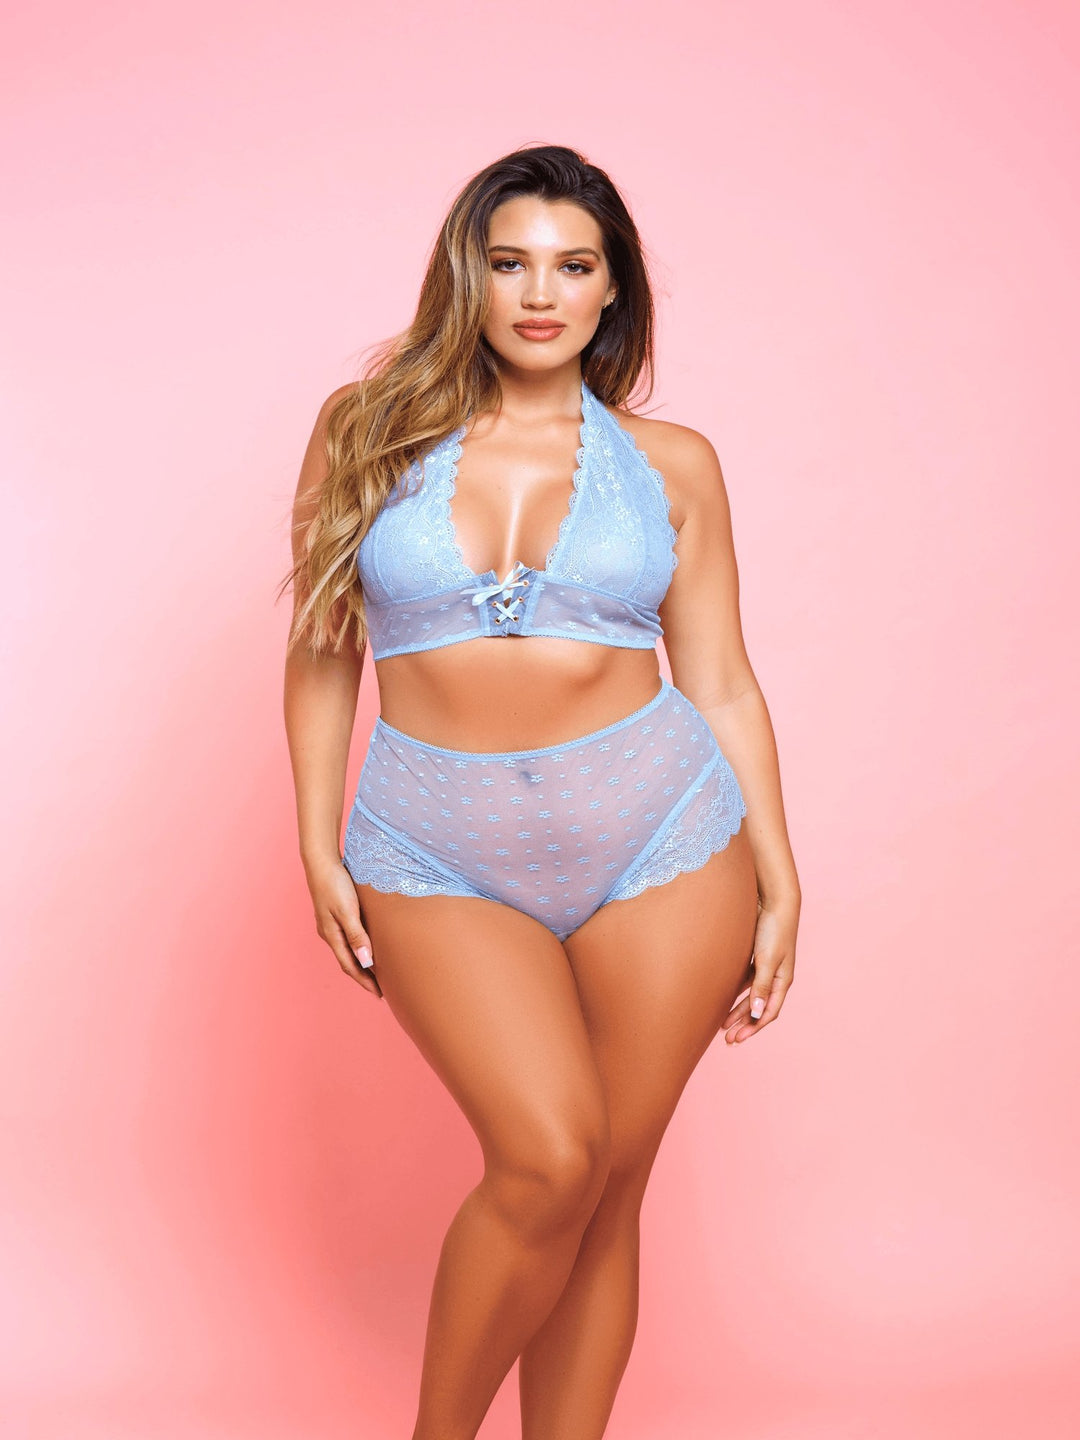 Plus sizes light blue 2 piece net and floral lace daisy detail bralette and high waist panty set